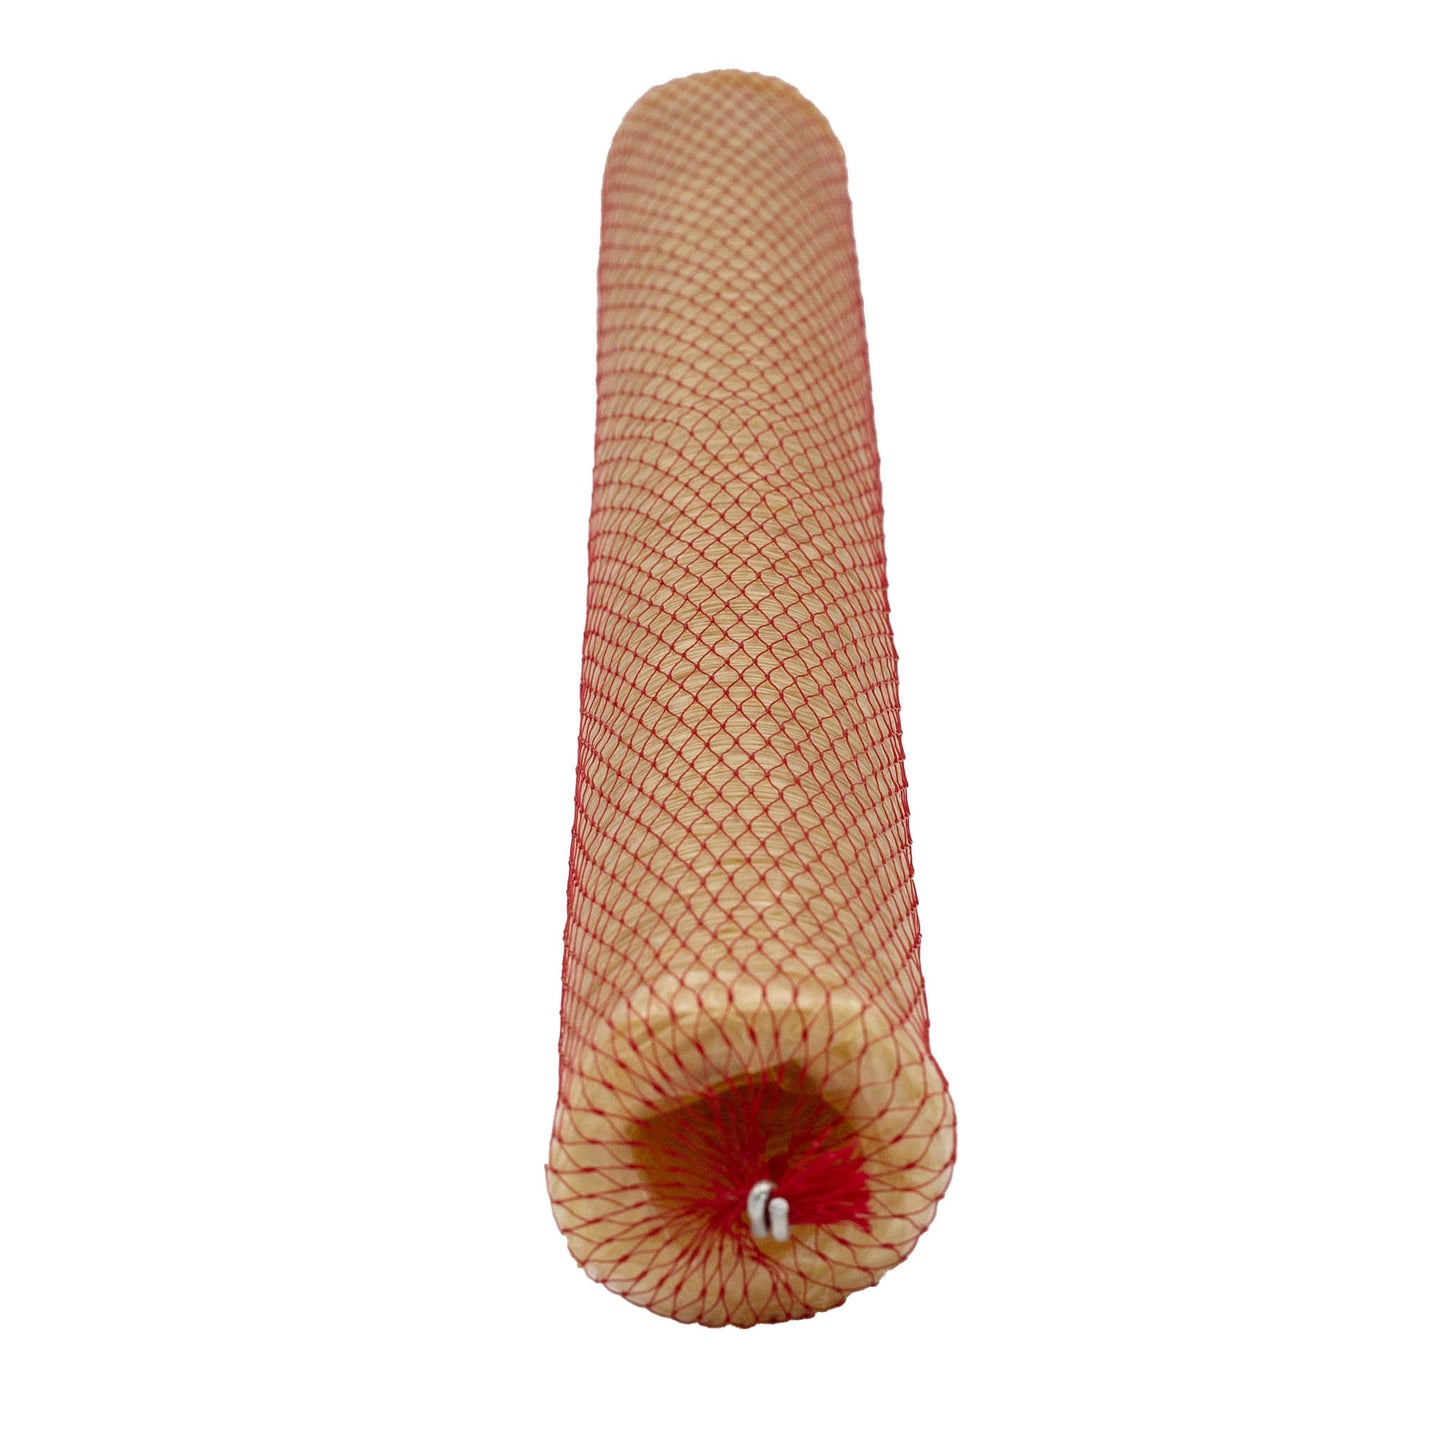 Fibran casing stick. 50mm diameter by 20 metres long for salami and cured sausages